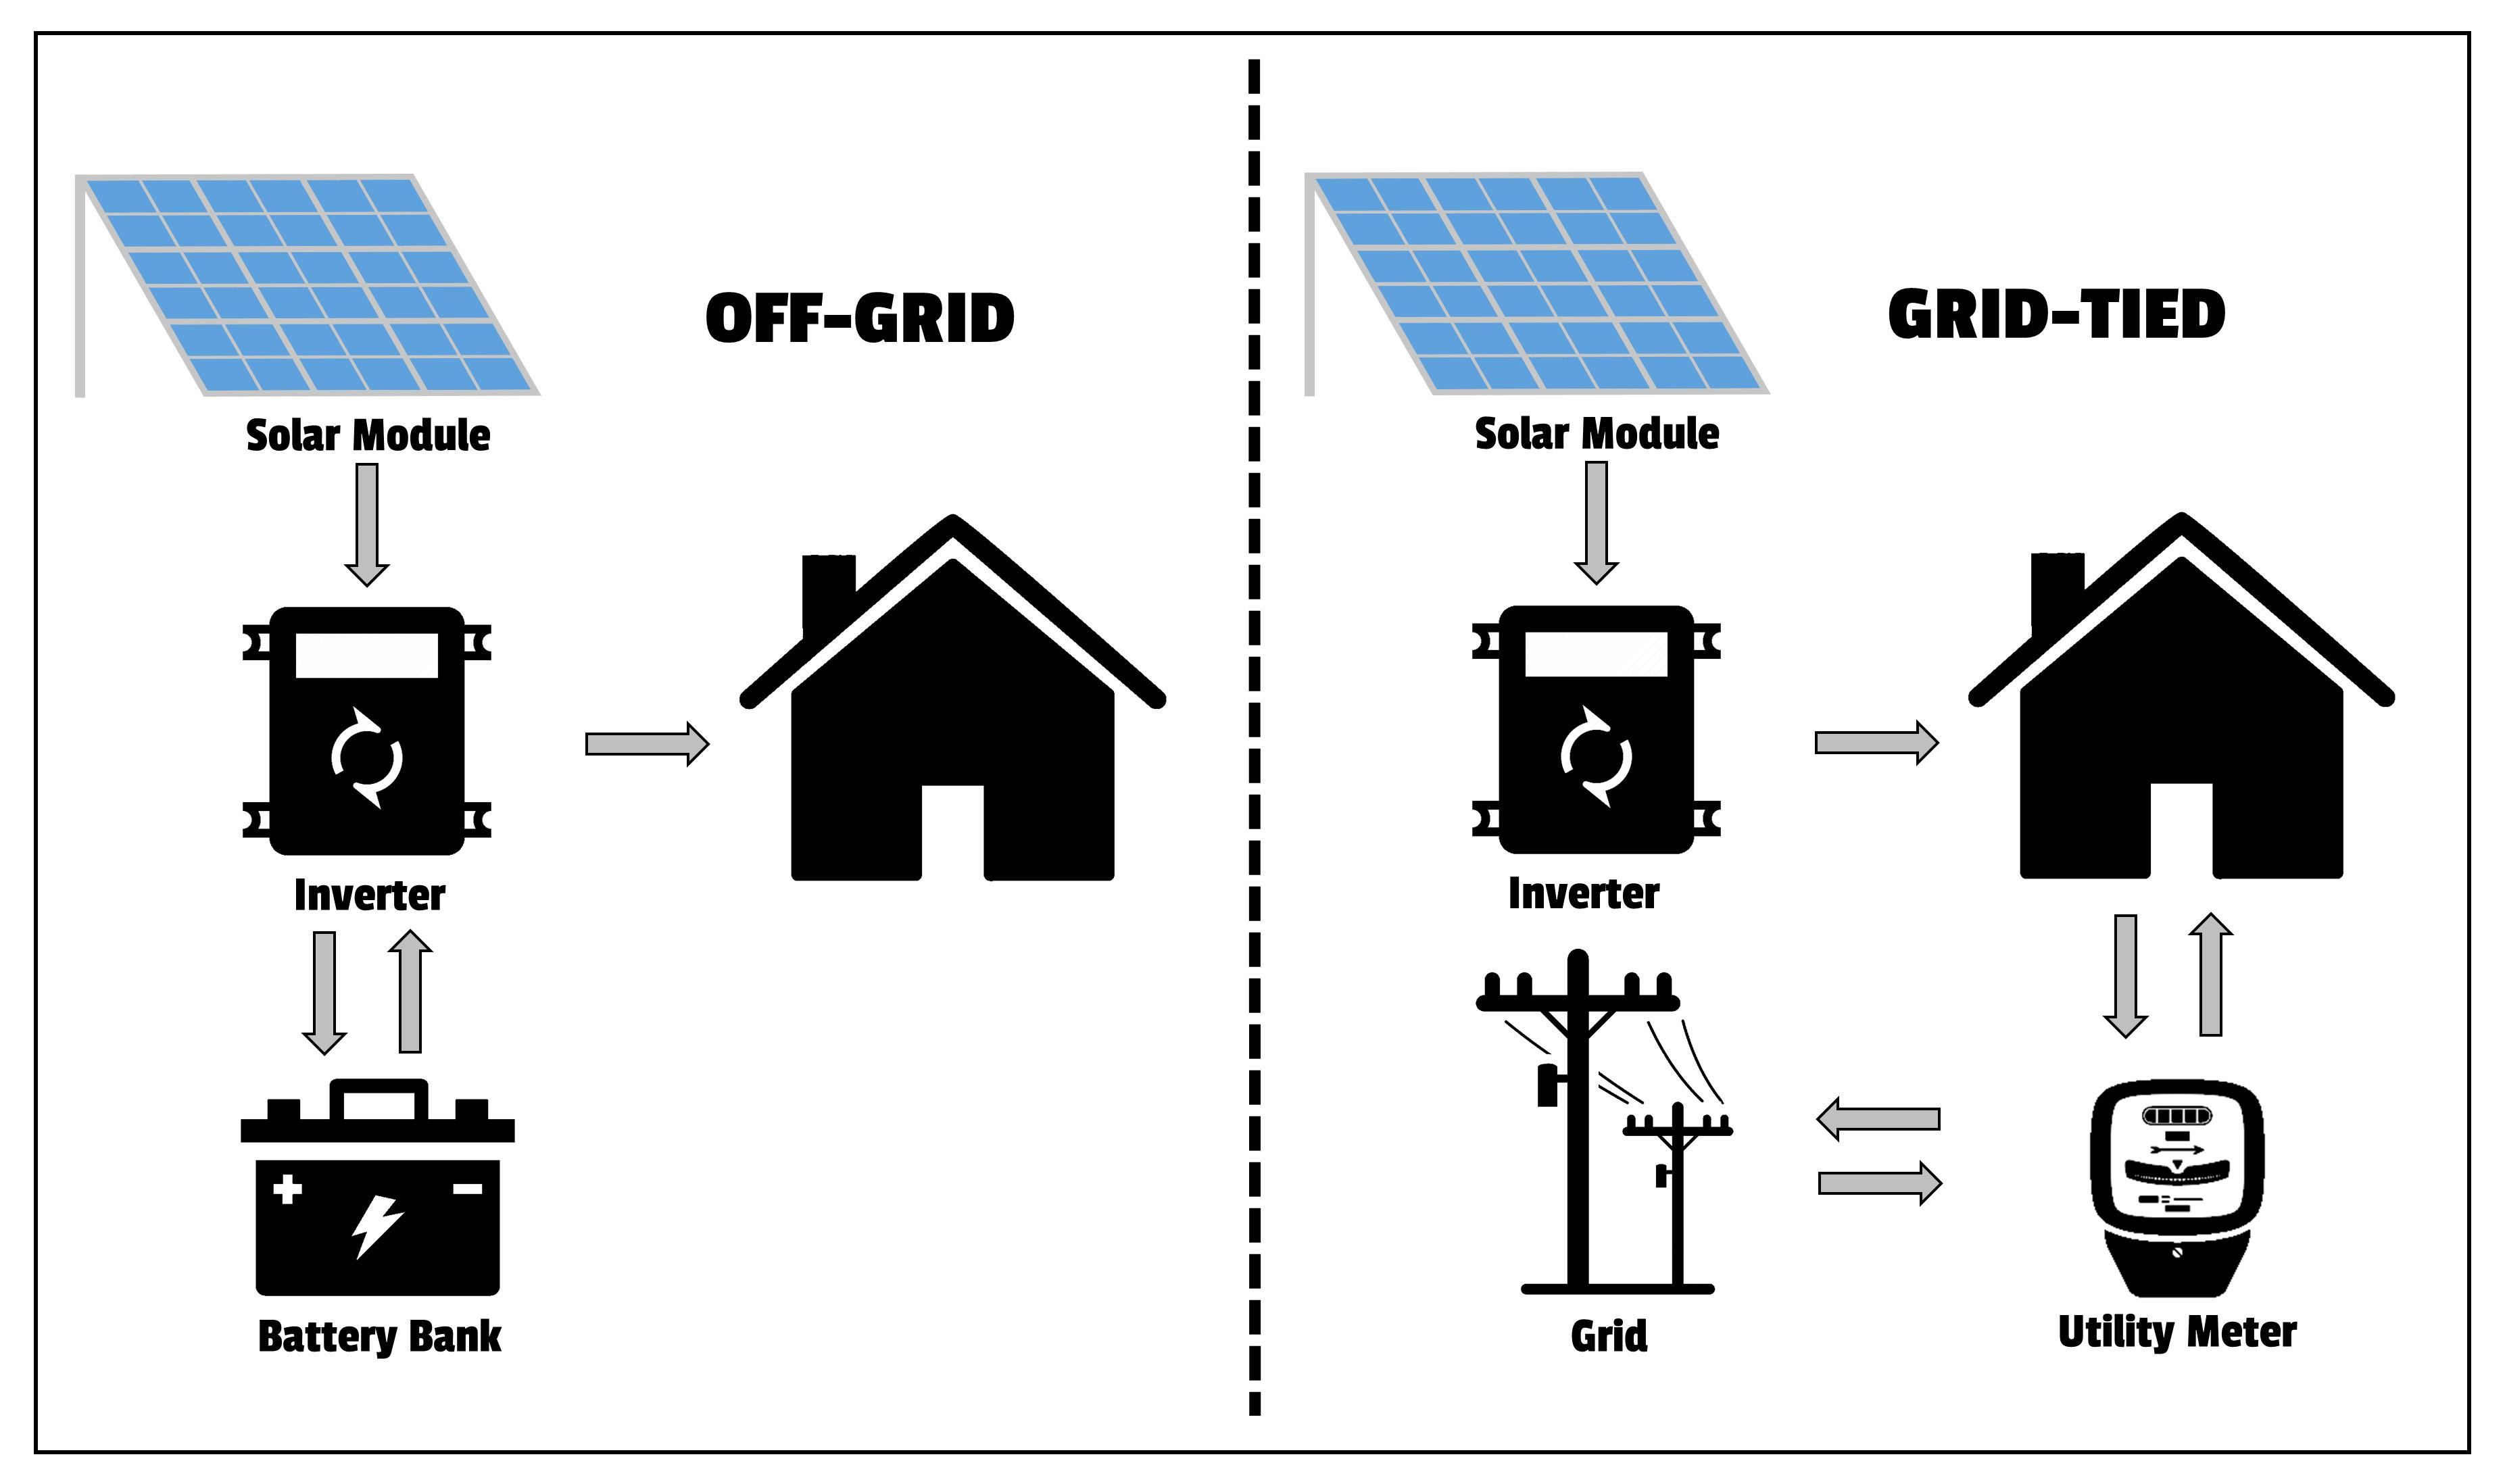 Differences between grid-tied and off-grid solar photovoltaic (PV) options